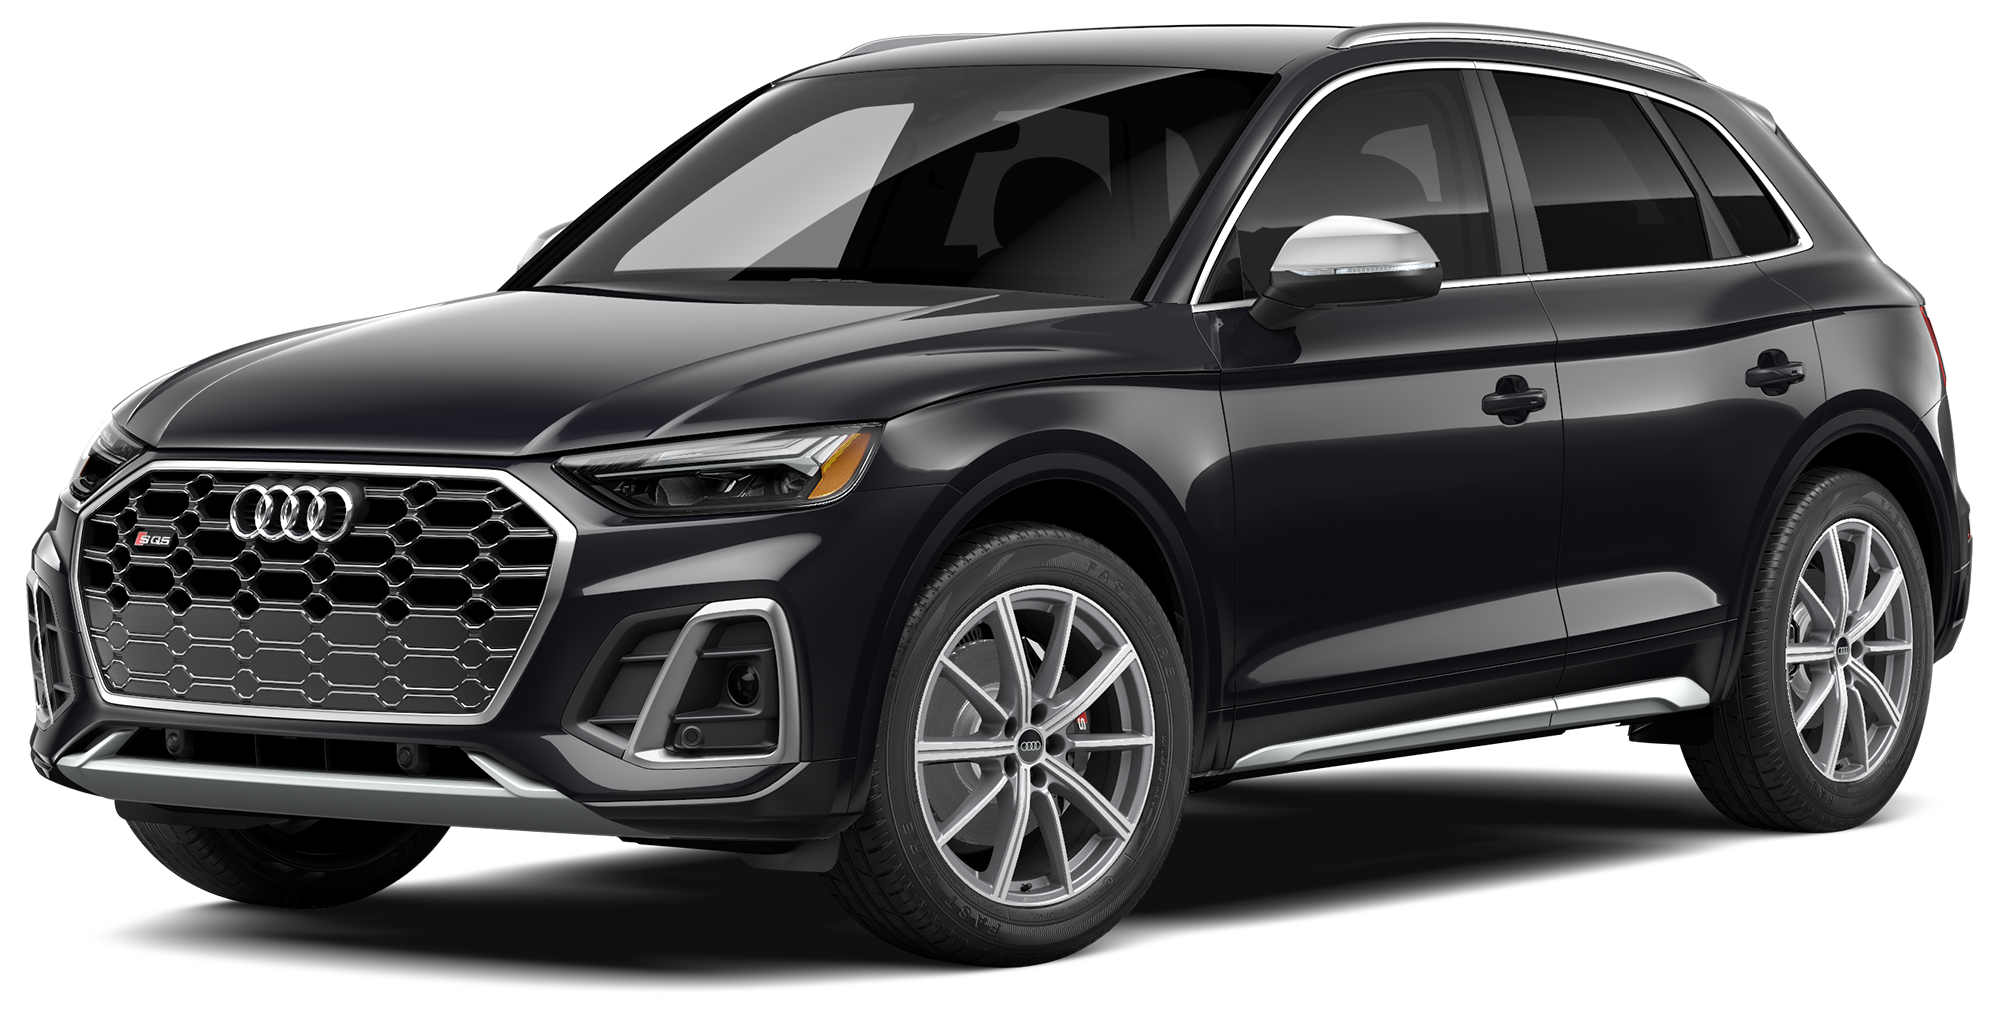 2022 Audi SQ5 Incentives, Specials & Offers in Charlotte NC